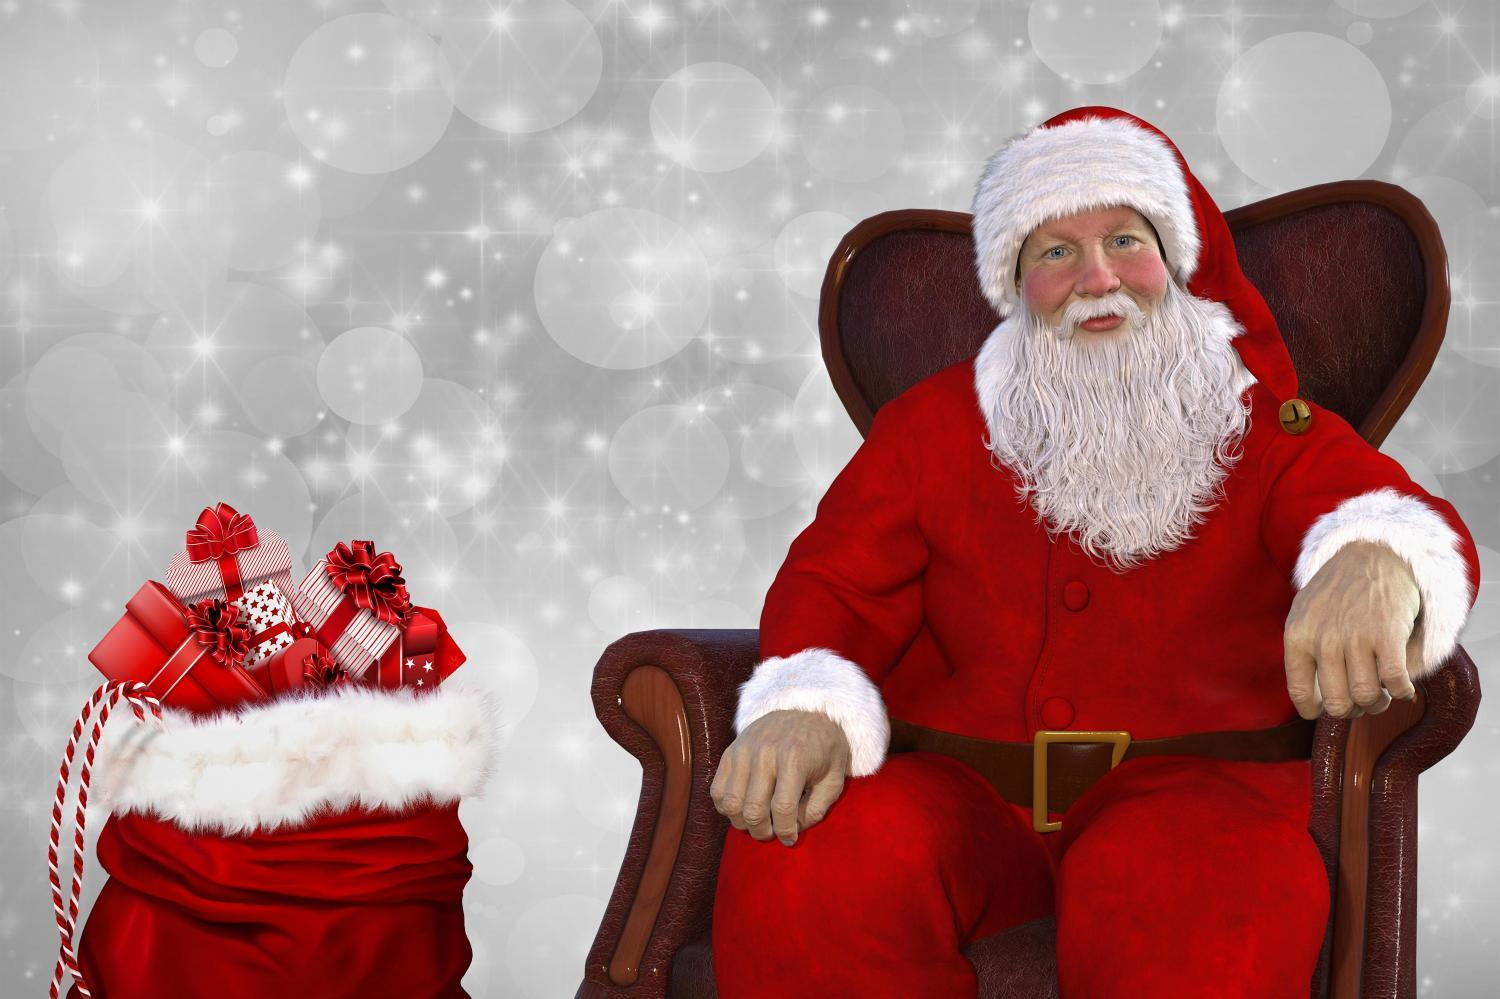 Breakfast with Santa and Stew’s Costumed Characters
Sat Dec 17, 9:00 AM - Sat Dec 17, 10:00 AM
in 43 days